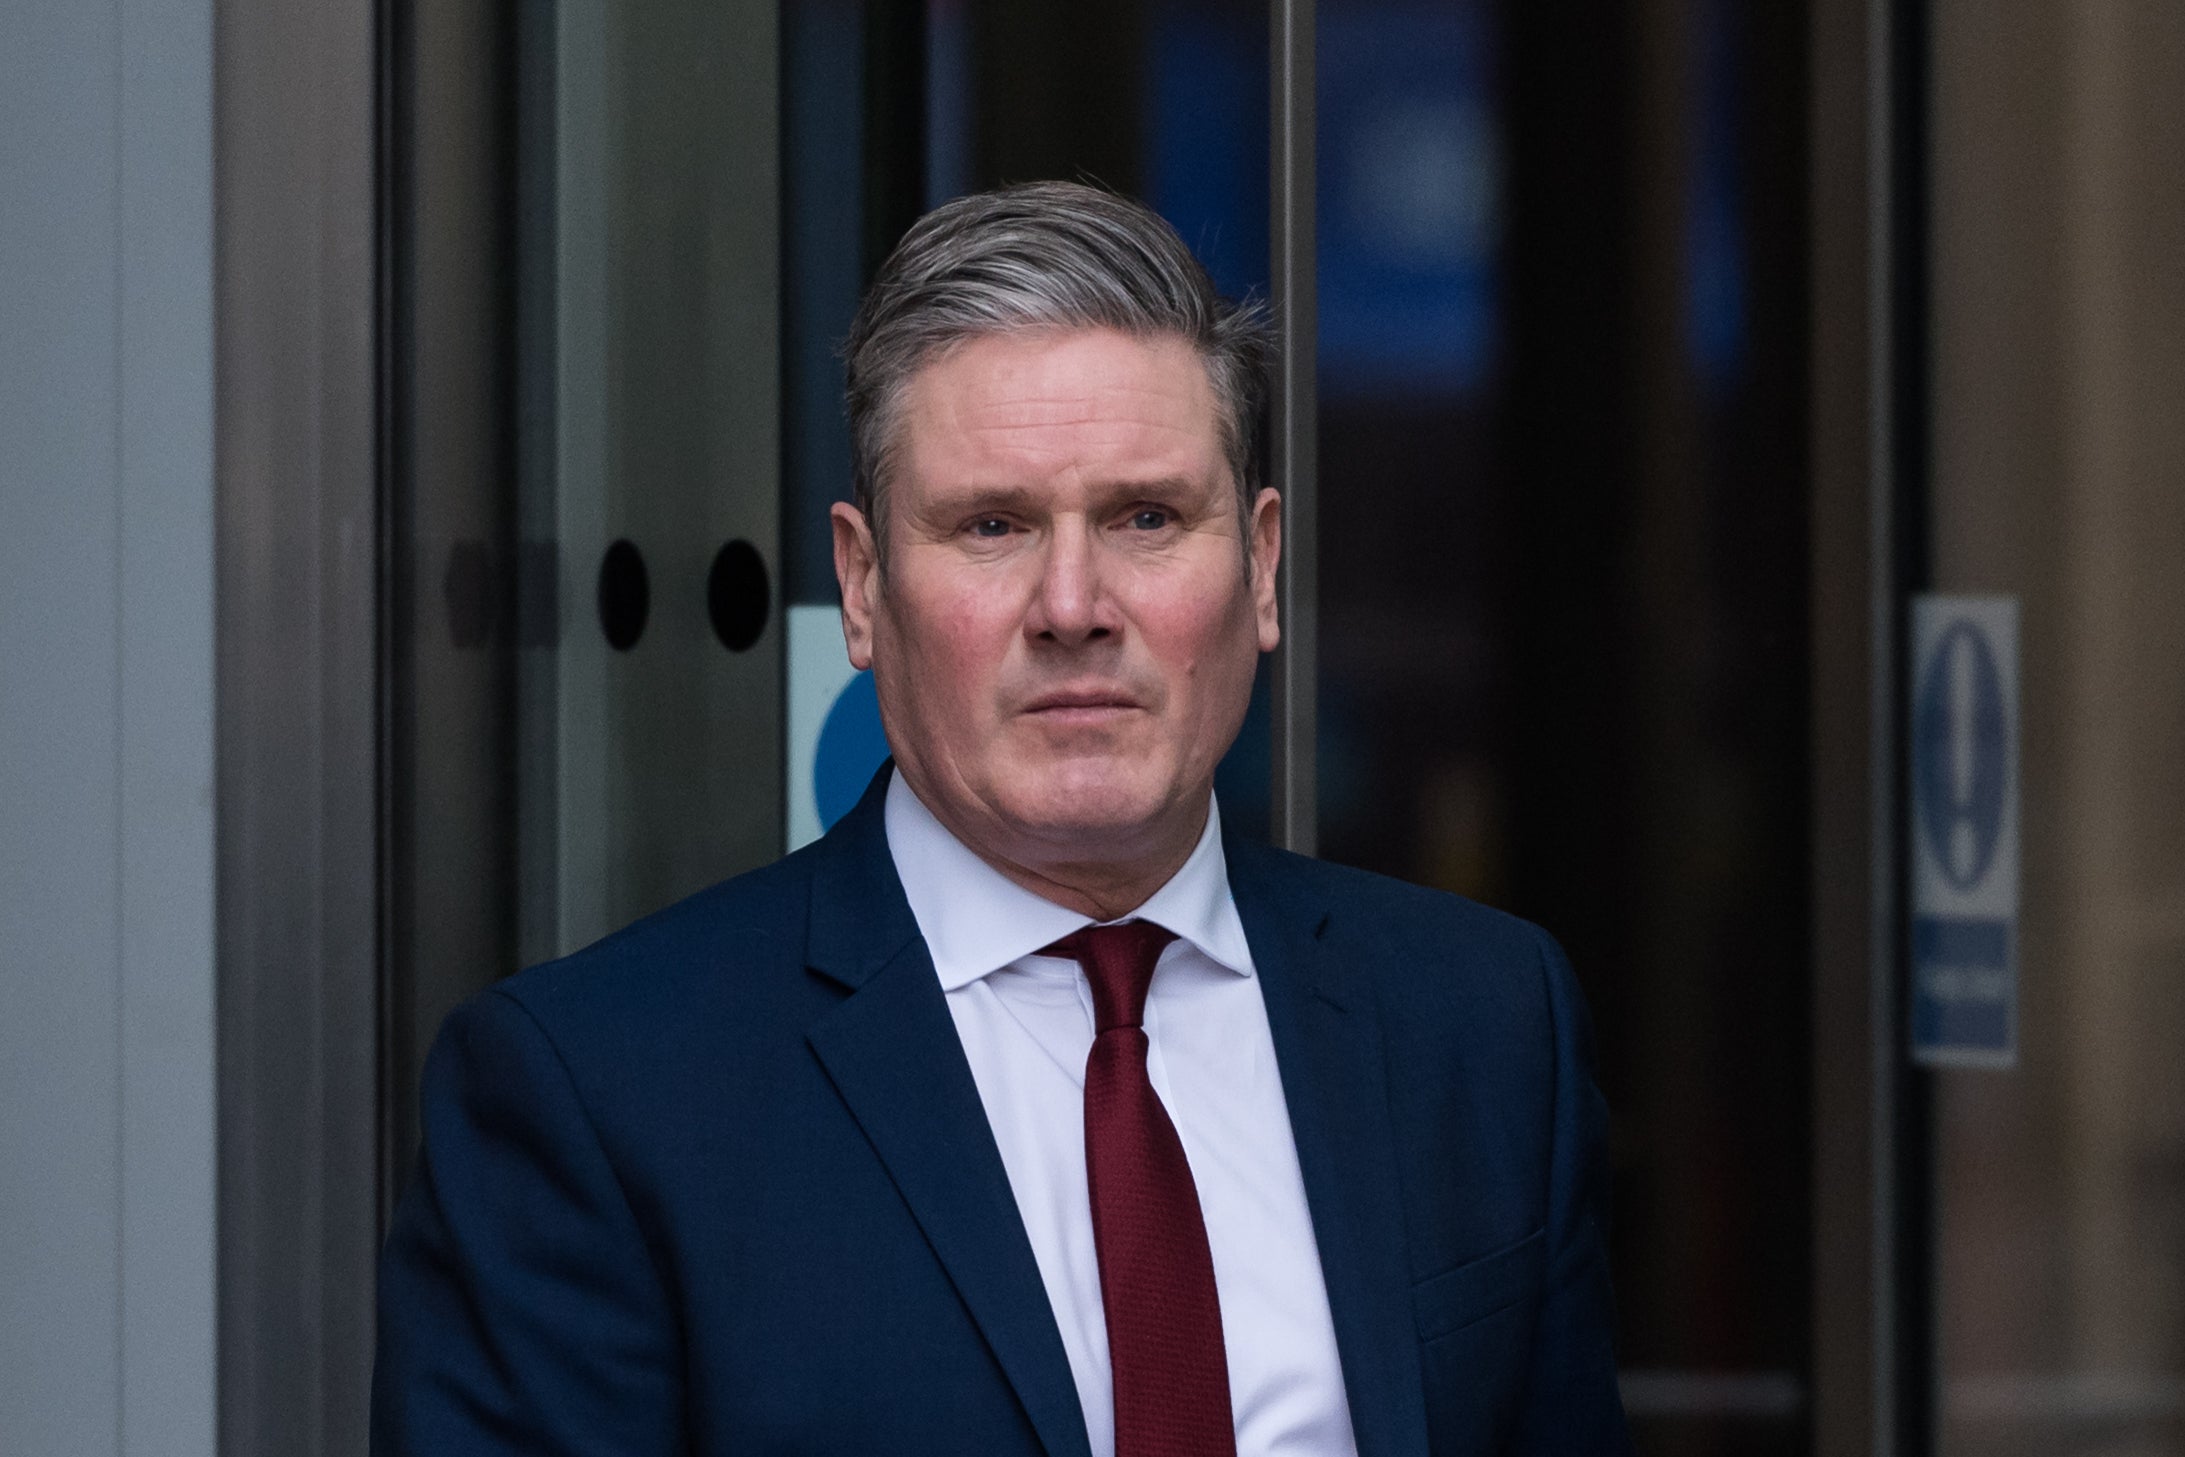 ‘In Labour’s ranks, doubts remain about Starmer’s ability to turn things round’